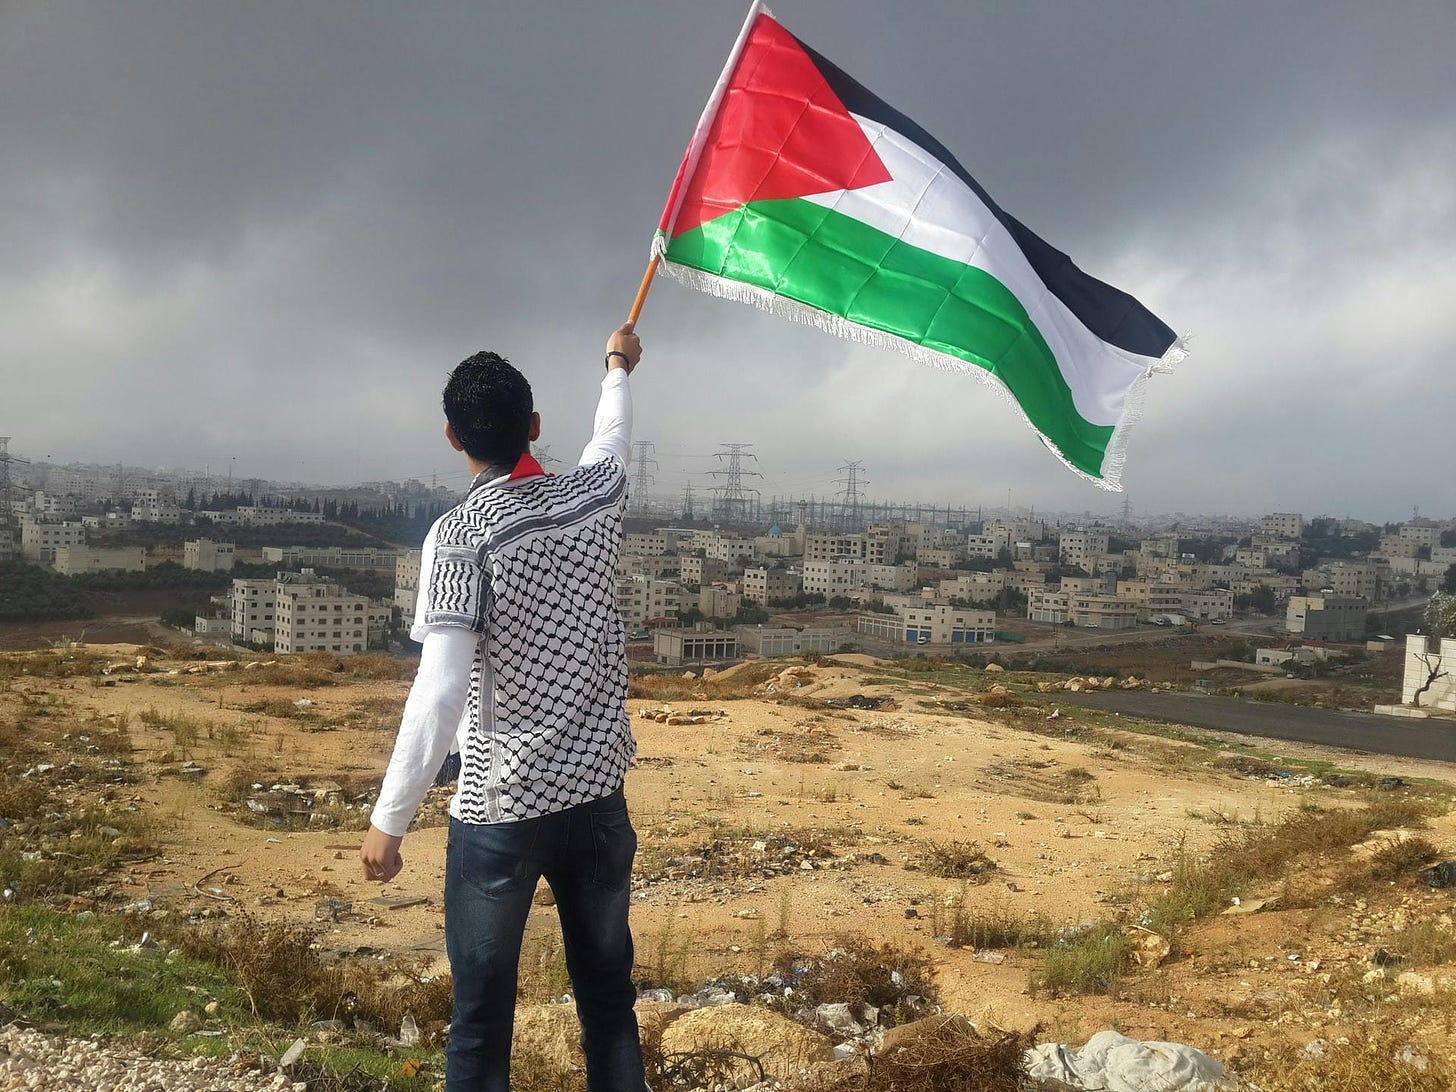 Reflections on International Law and Palestine